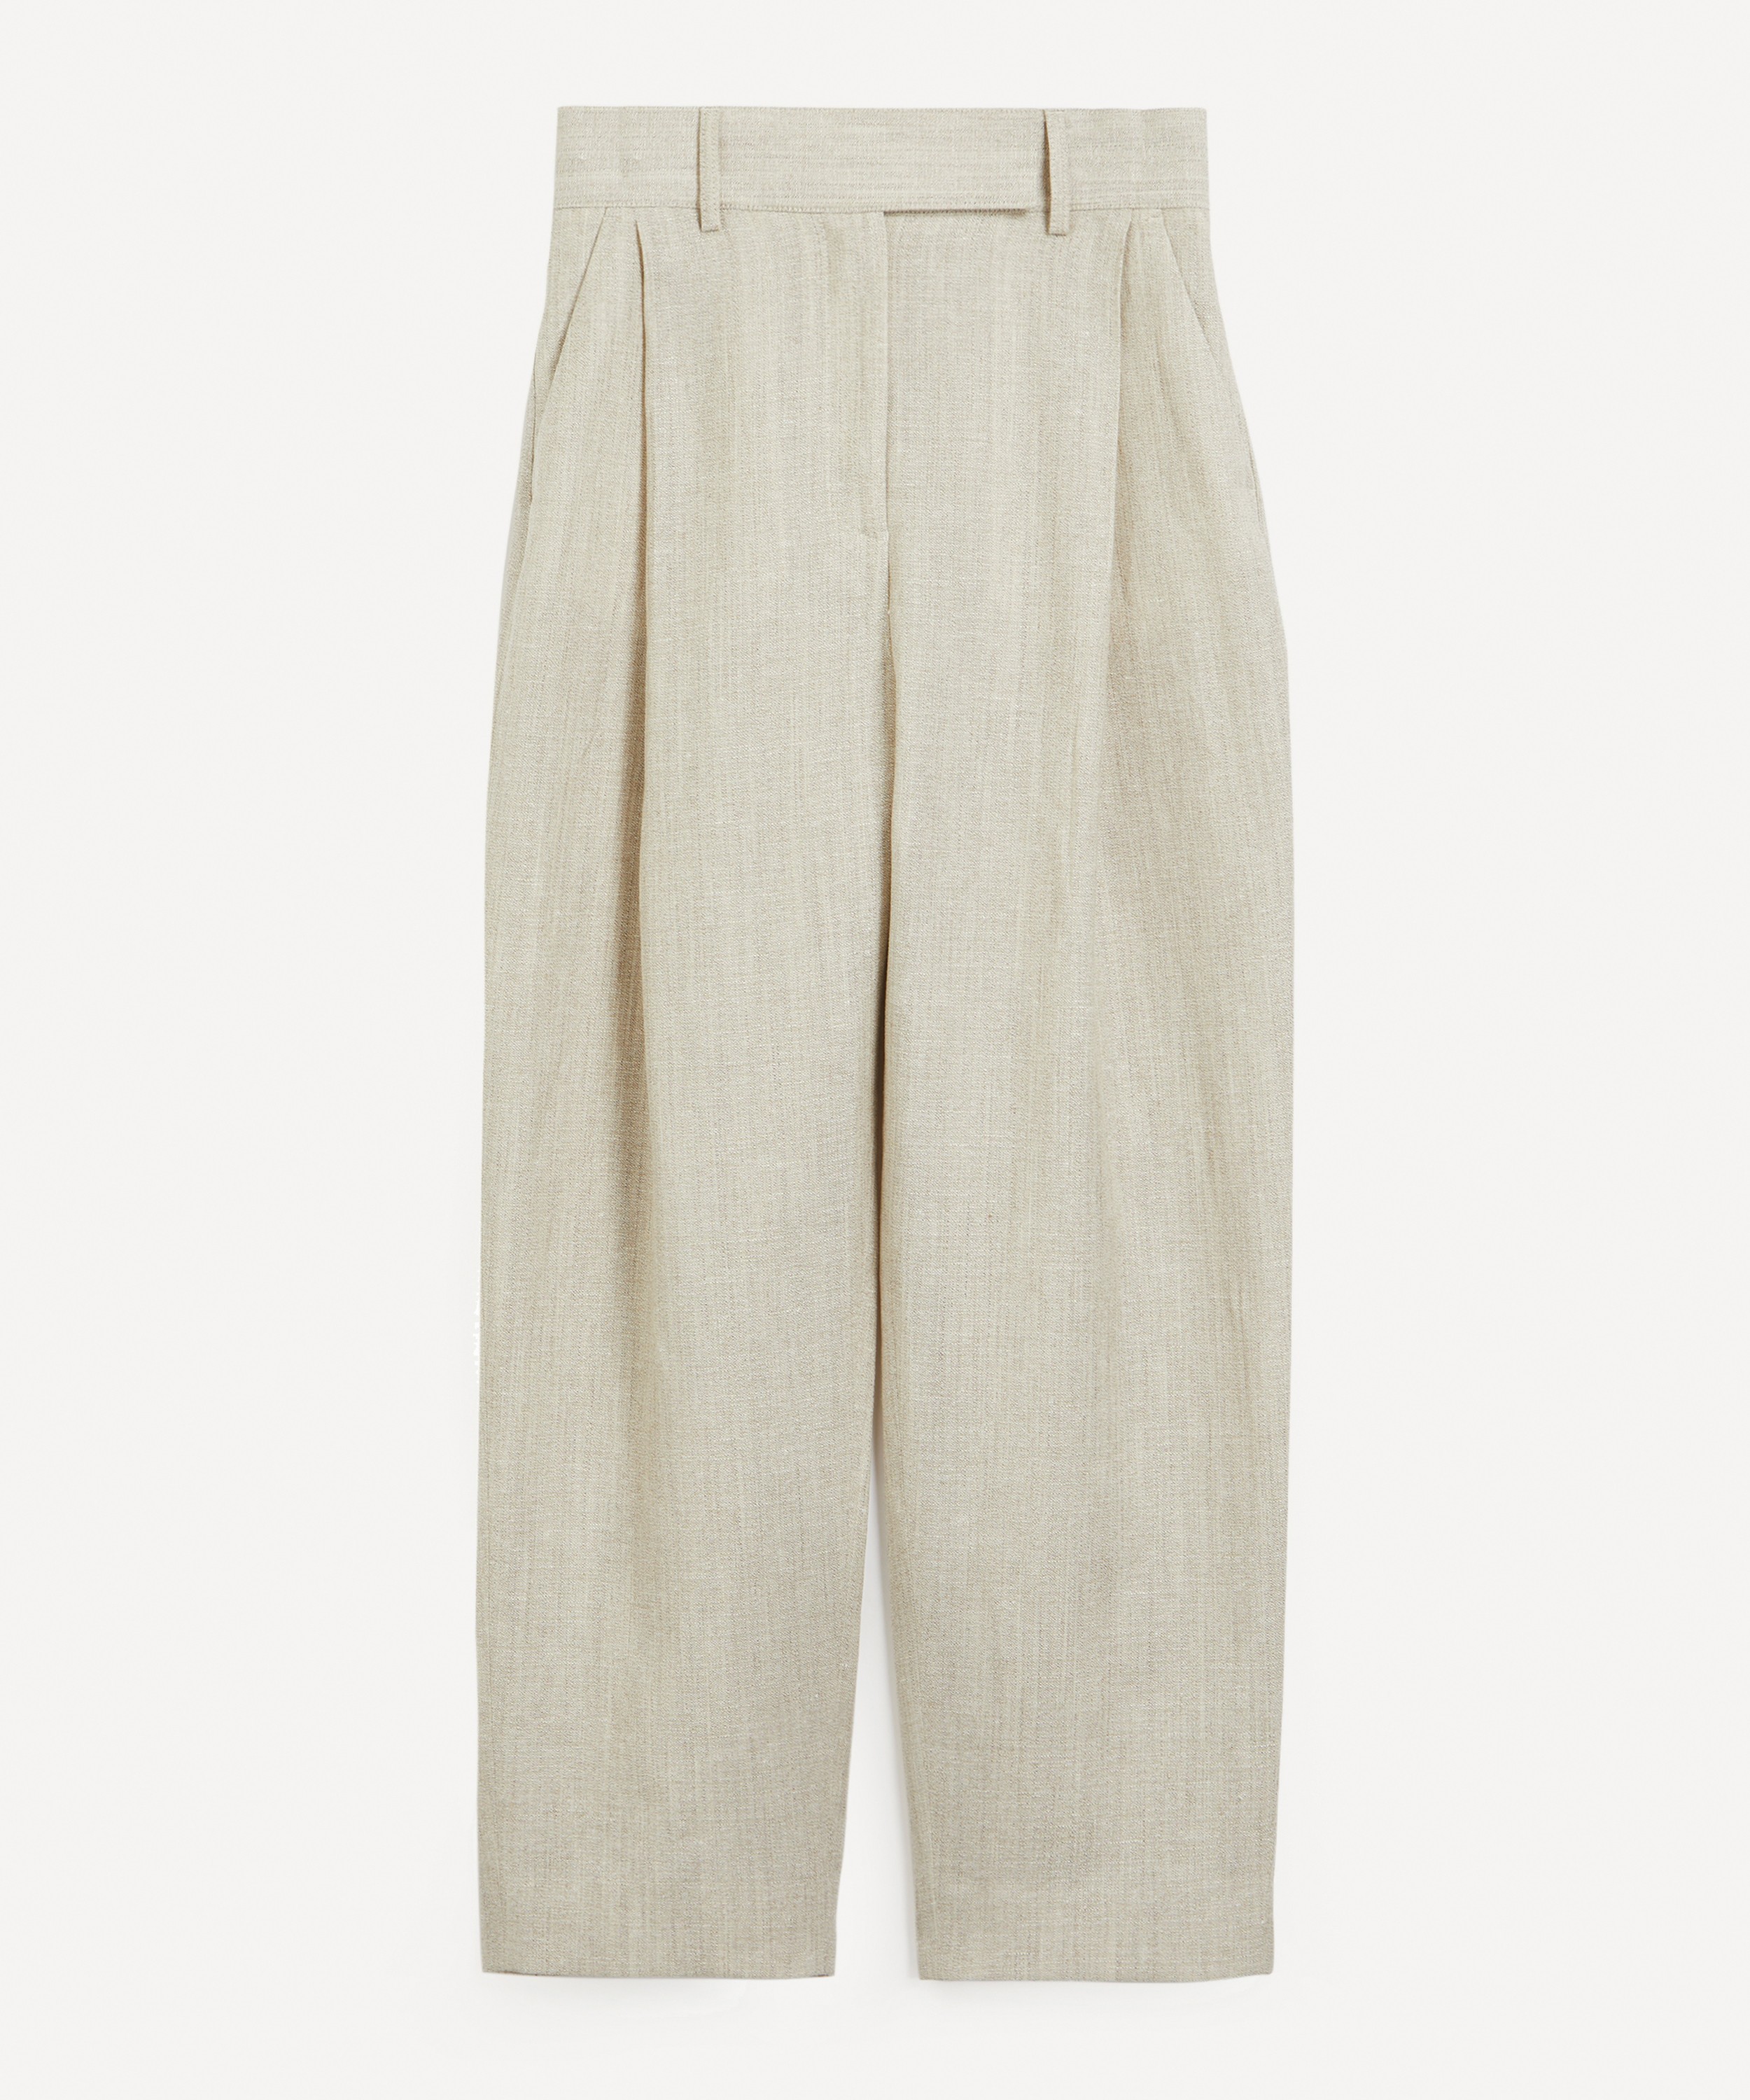 Totême - Overcast Beige Pleated Cotton Twill Shorts